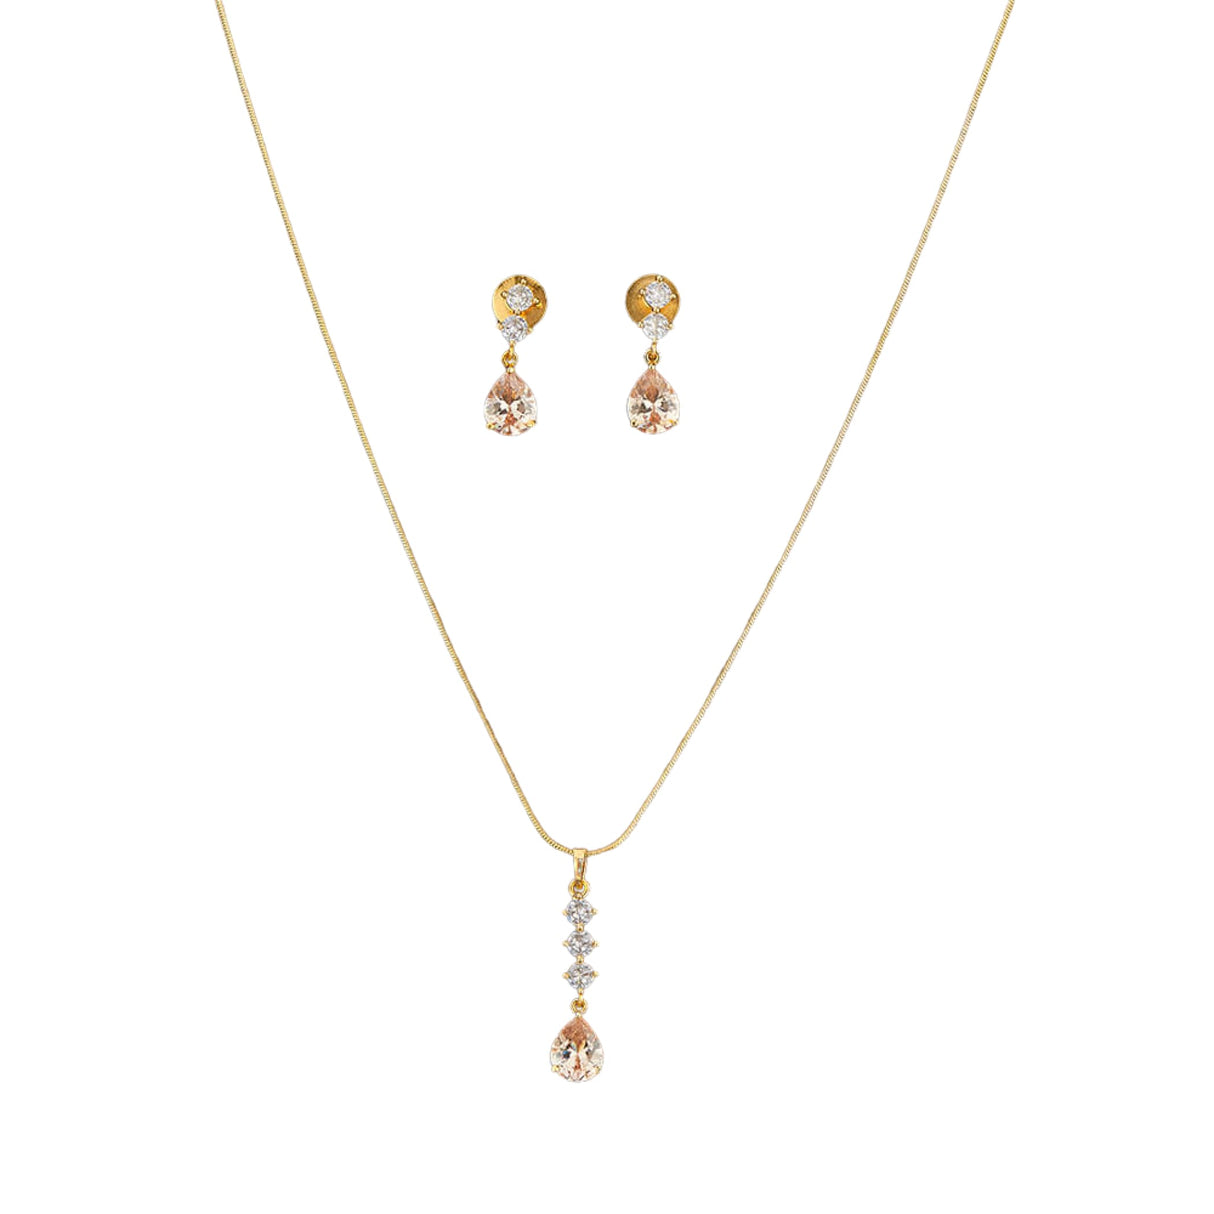 Cz classic pendant set with gold plating jewelry